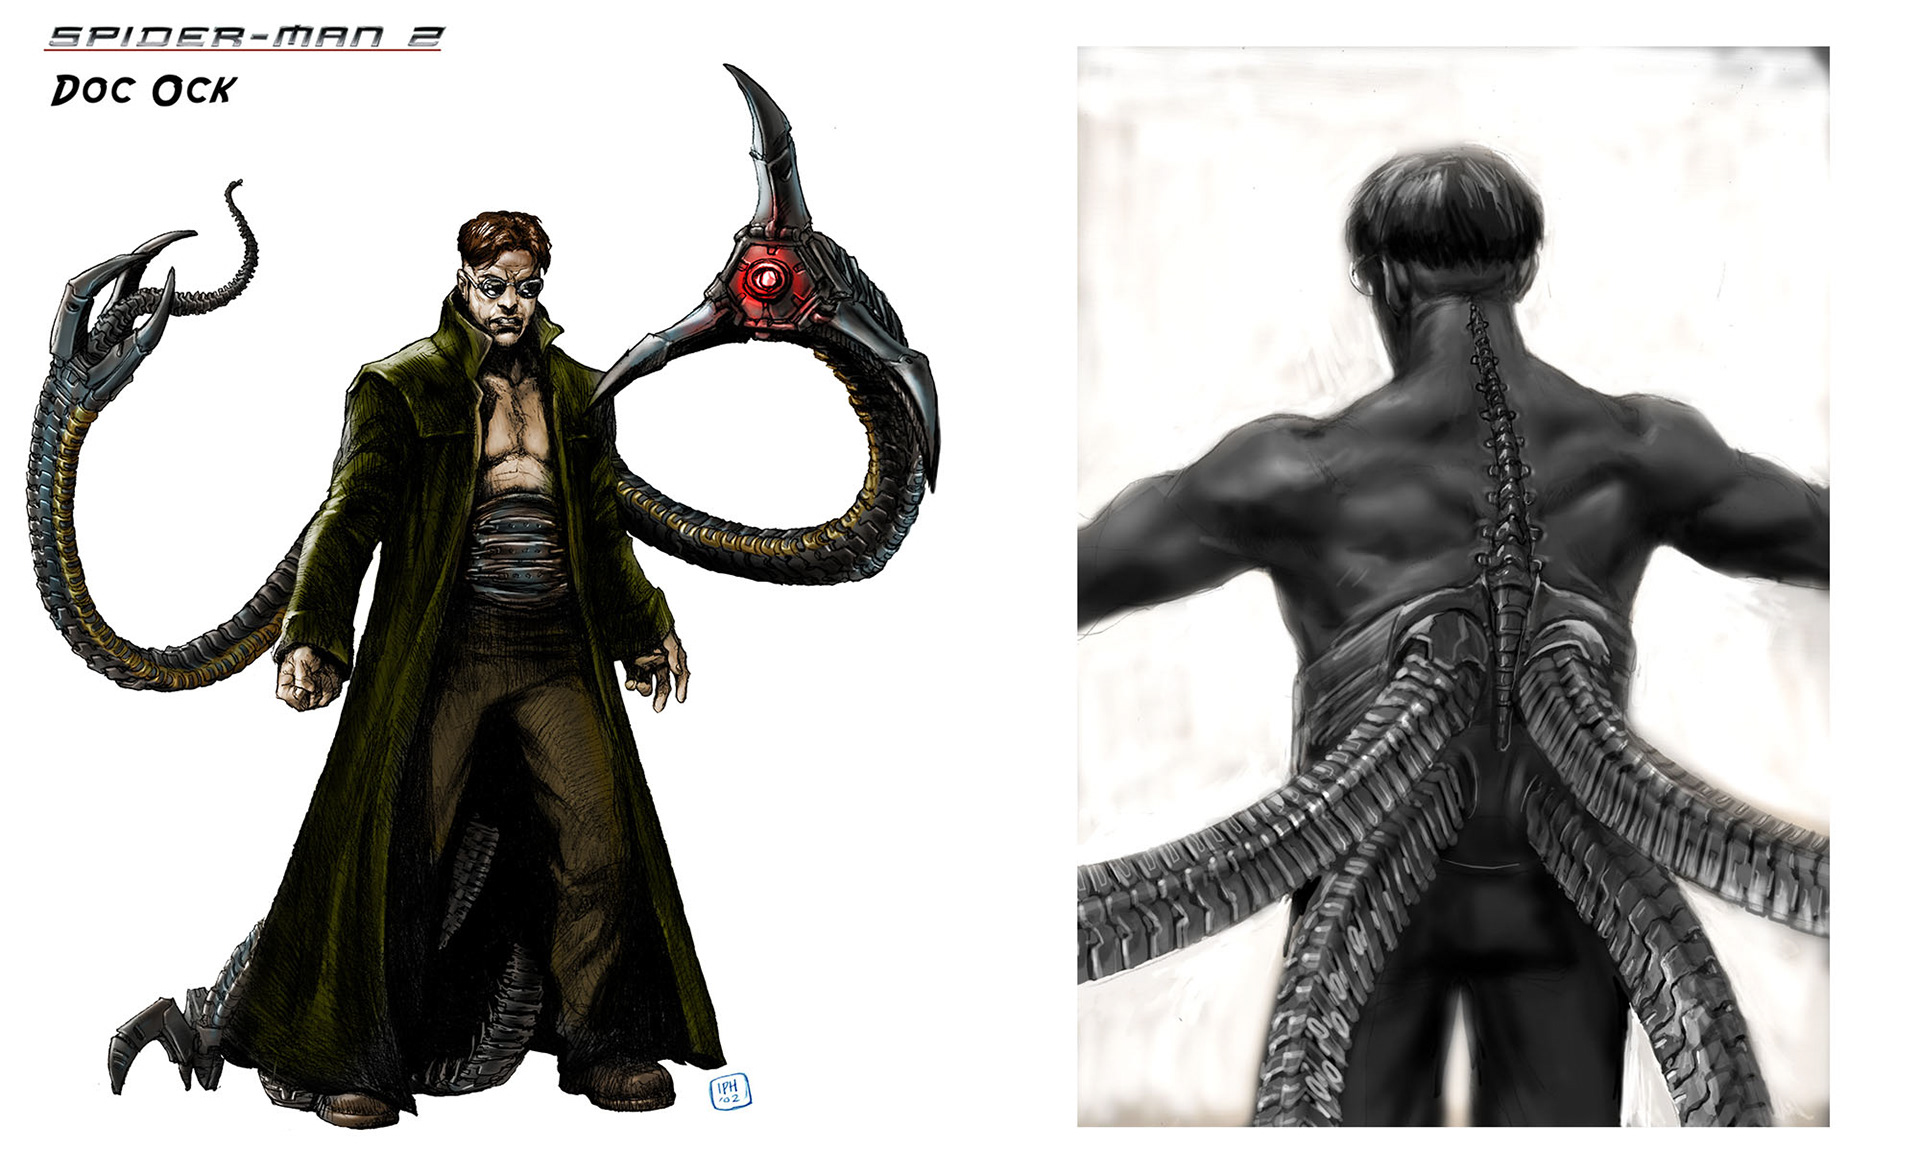 A much cooler, and tragic version of Doc Ock, portrayed by the... 